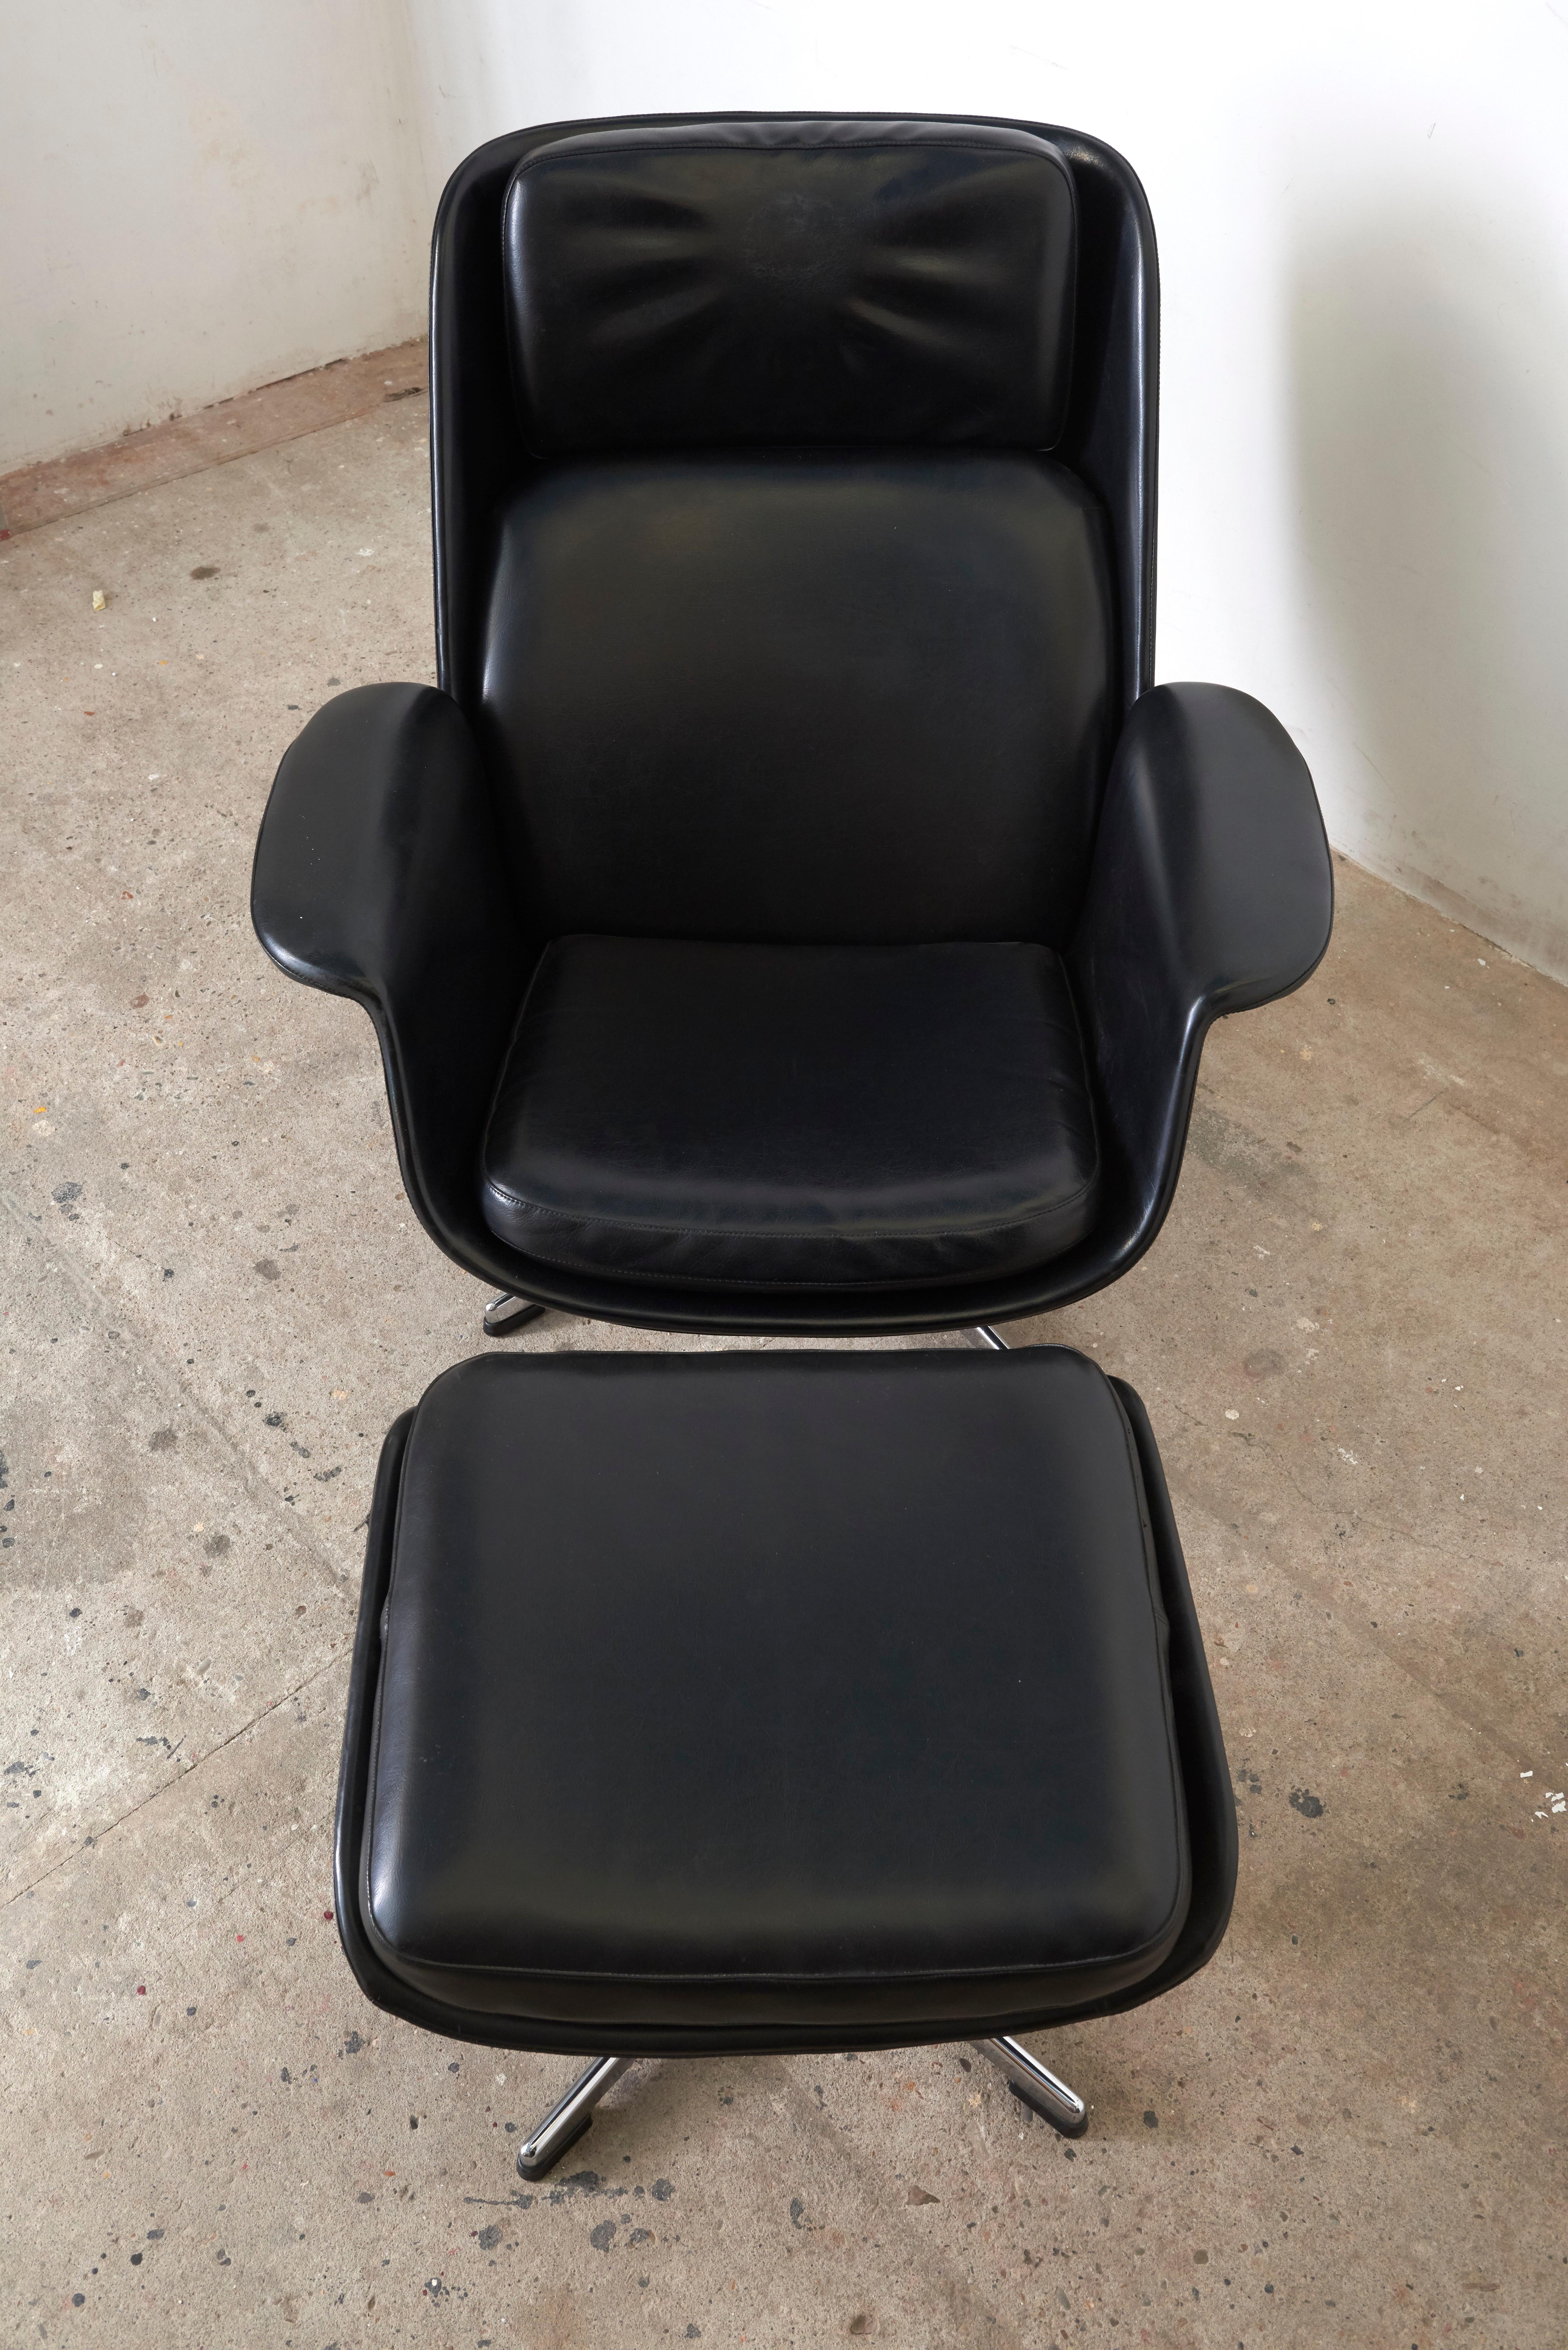 Rare black lounge chair with footstool designed by Olli Borg for Asko,Finland,1964.
Very comfortable swiveling armchair in original vintage condition, and a individual eyecatcher in every interior. 

Olli Borg was a Finnish interior architect